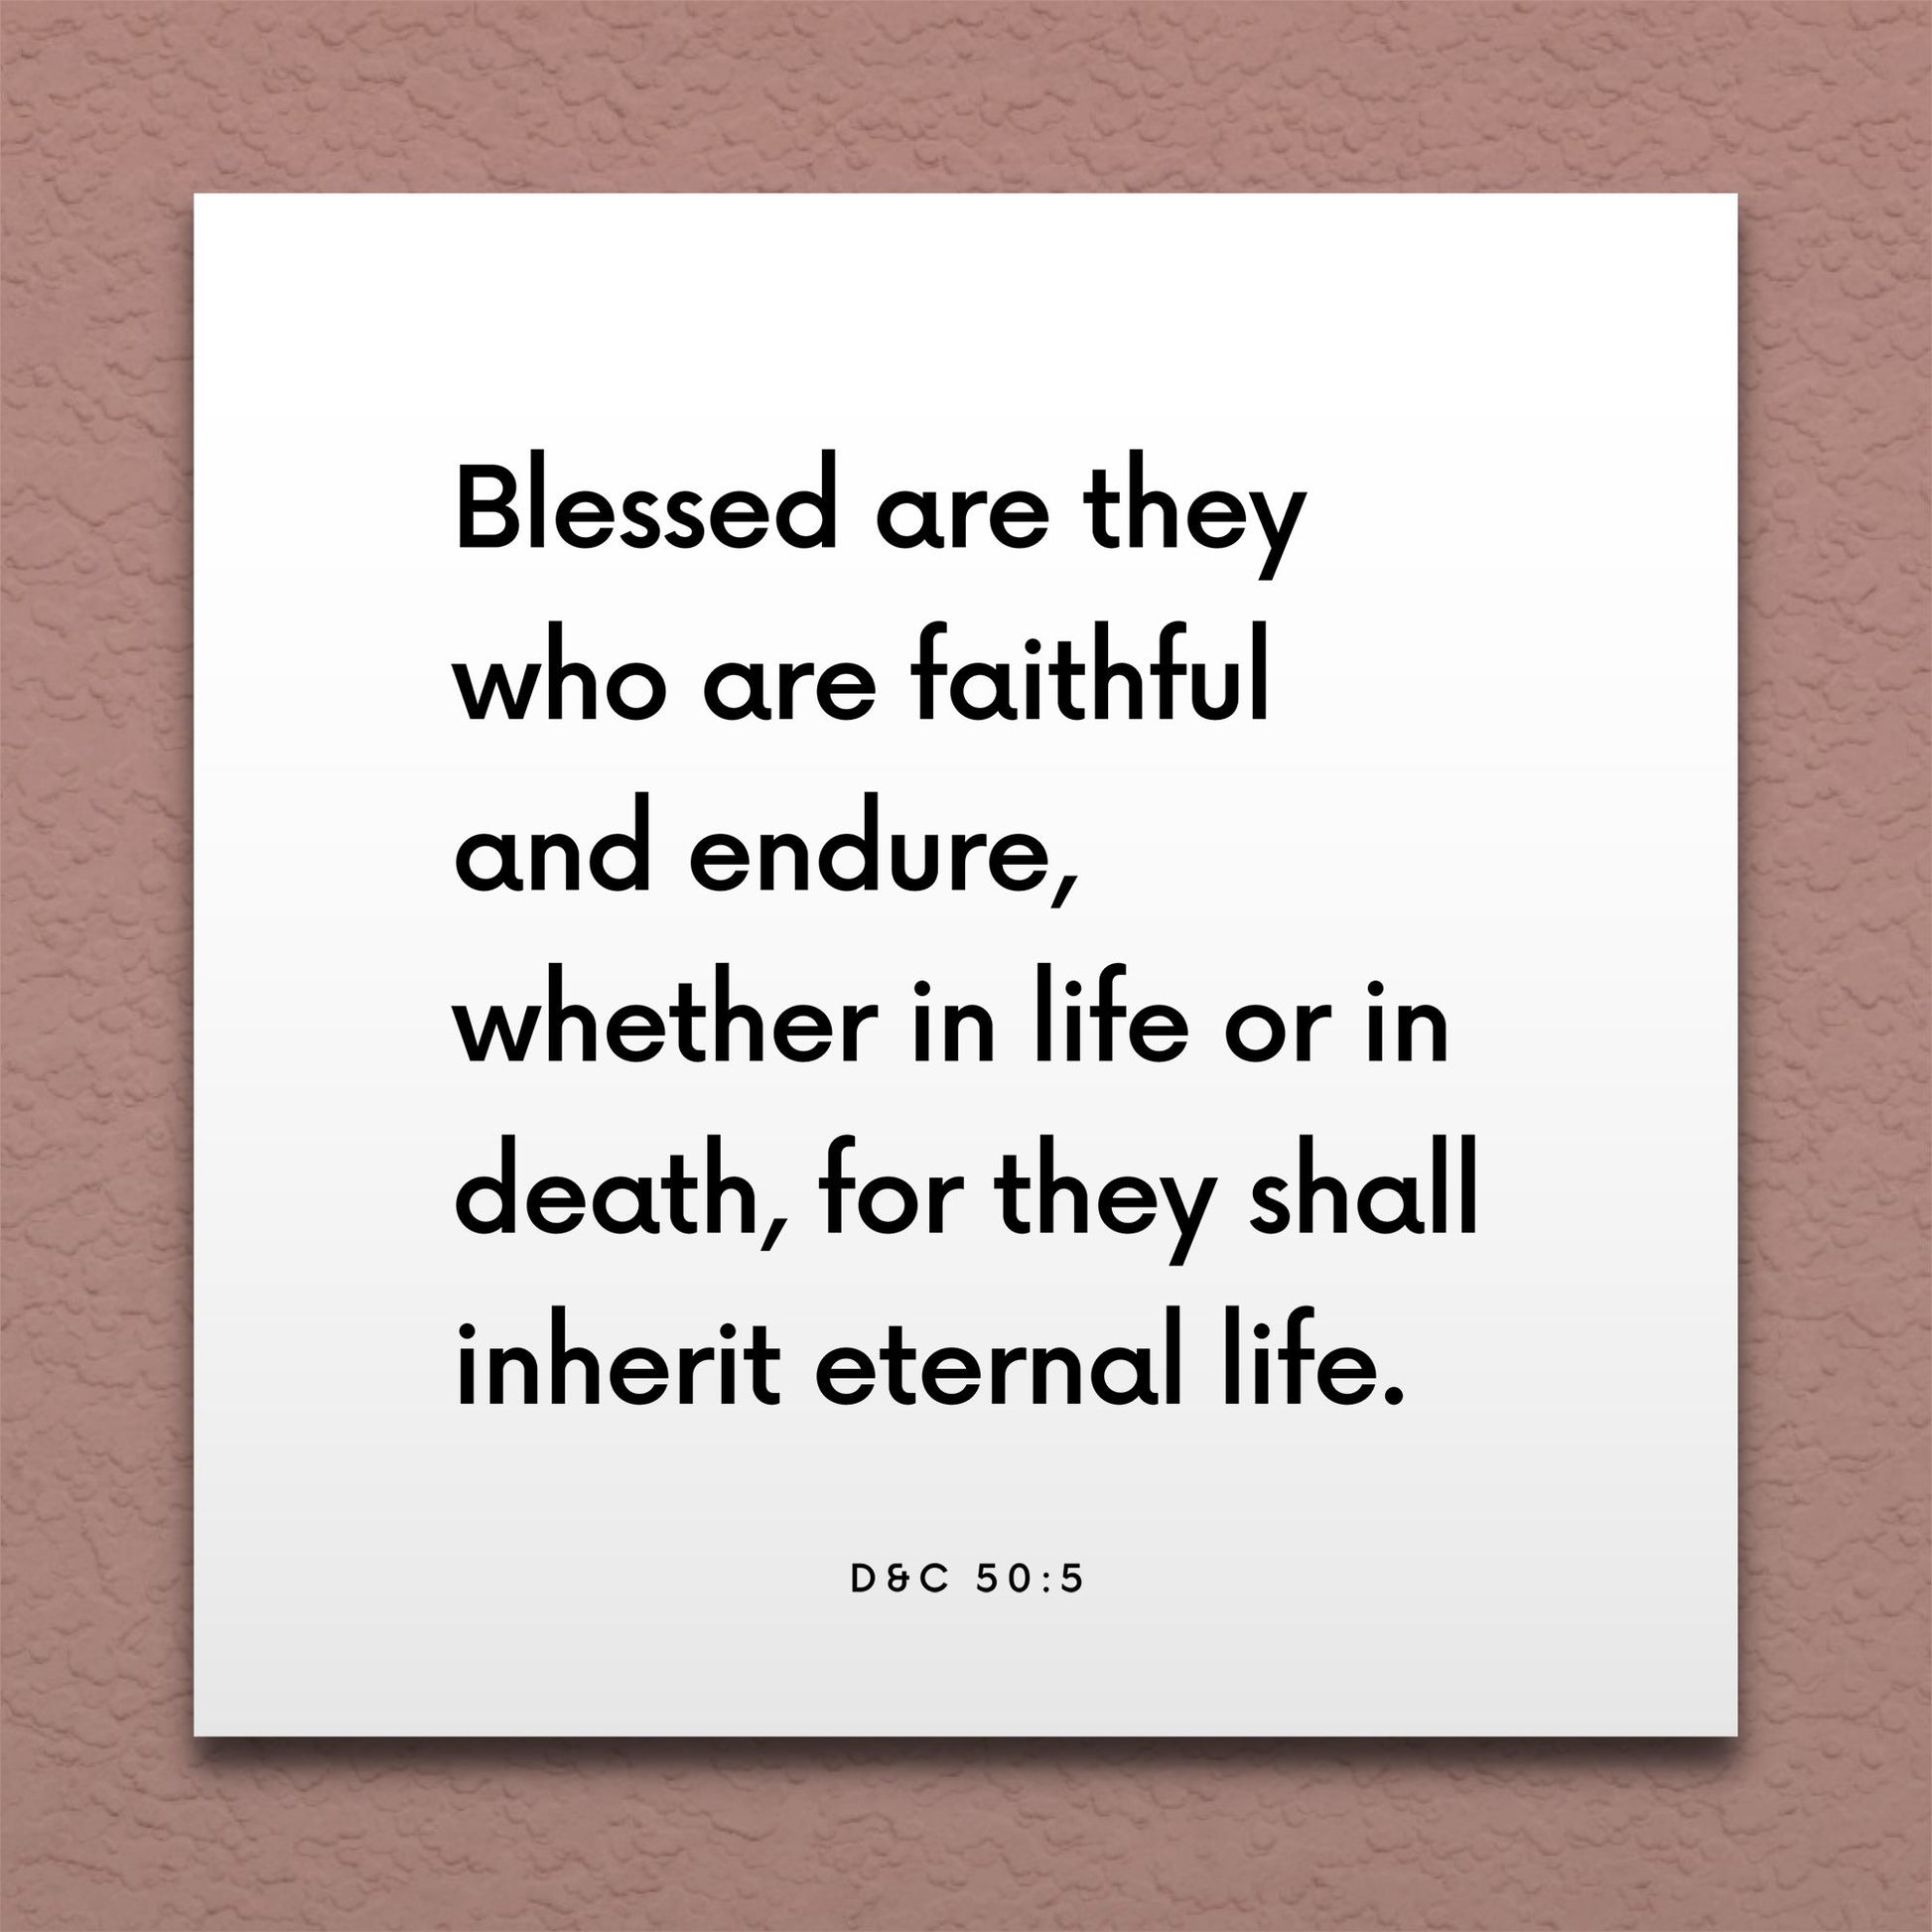 Wall-mounted scripture tile for D&C 50:5 - "Blessed are they who are faithful and endure"